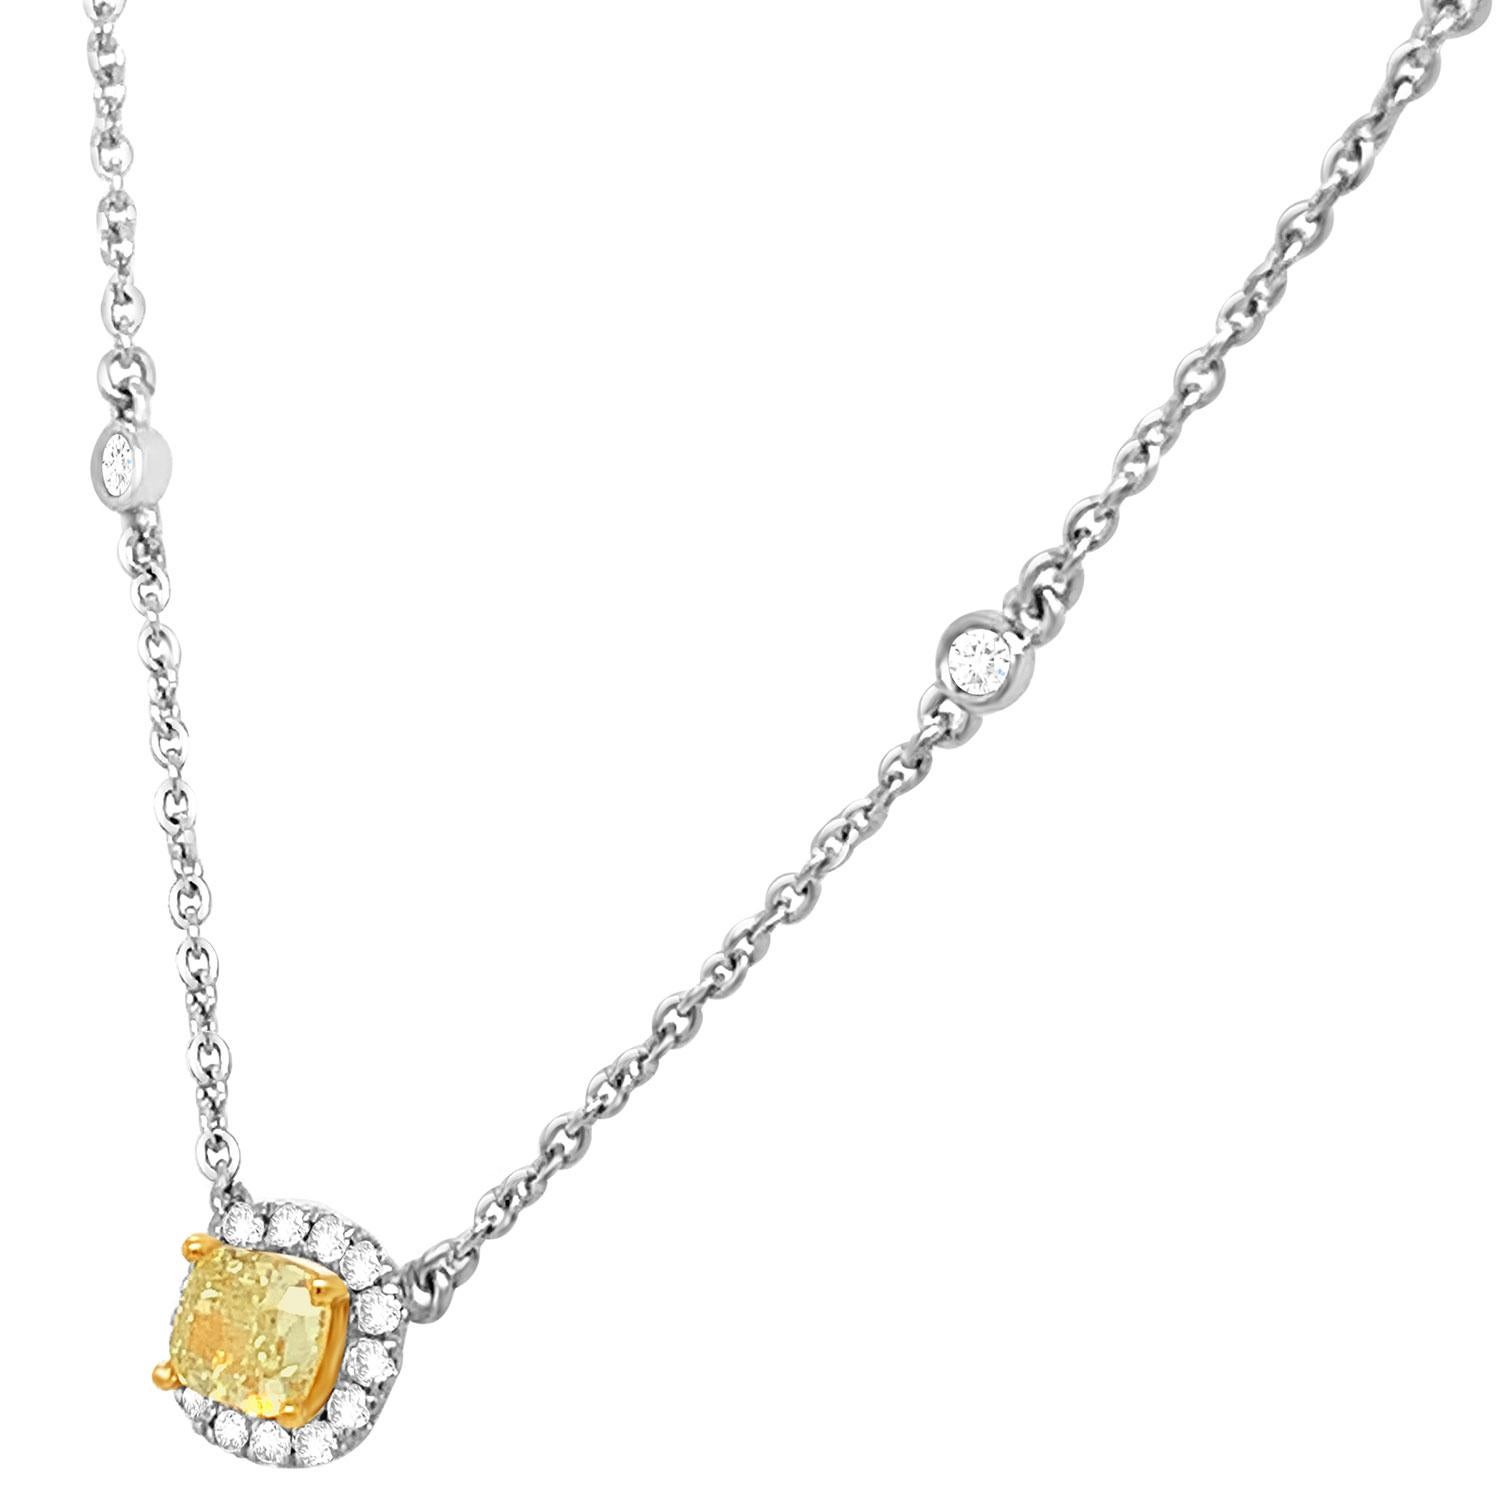 This stunning 18k White gold and Yellow gold necklace feature a 0.52 Carat Yellow Elongated cushion-shaped diamond encircled by one row of brilliant round diamonds on a 1 mm station chain containing sixteen (16) round brilliant diamonds bezel